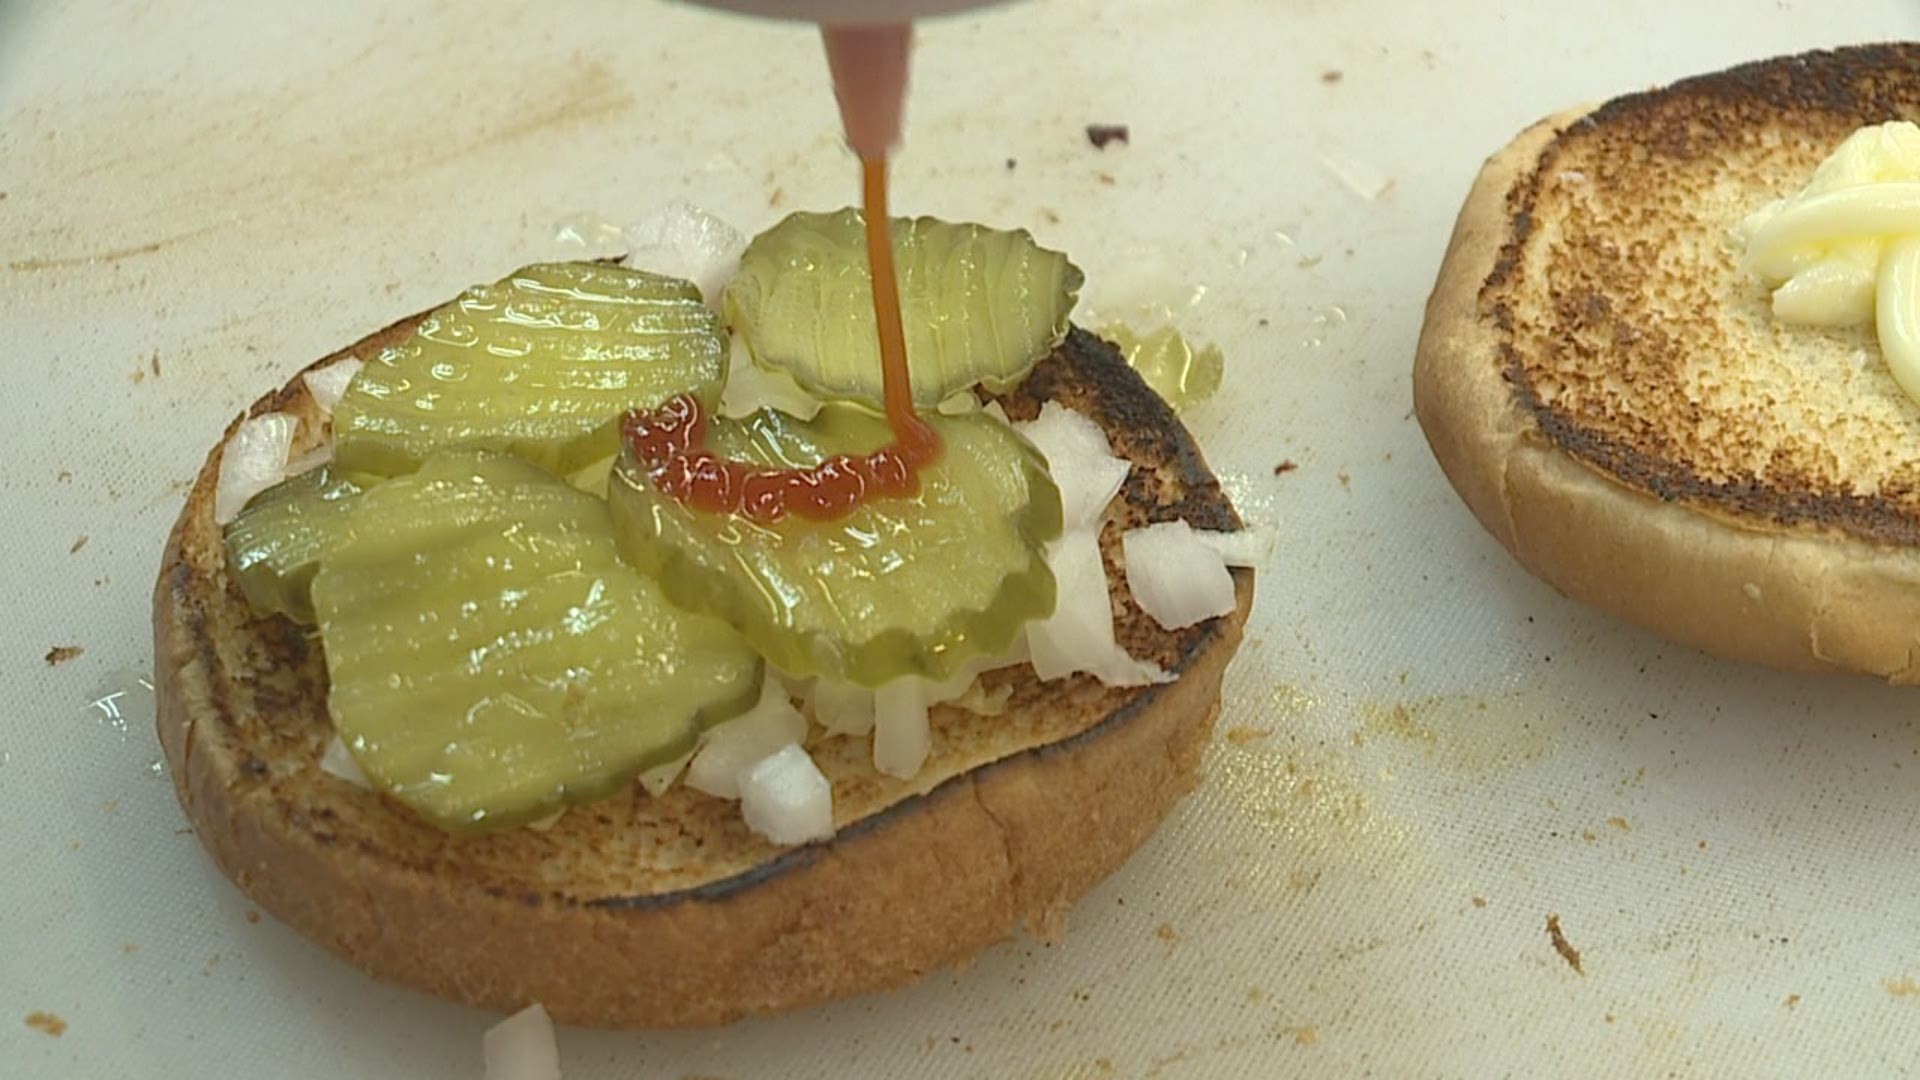 Jersey's bar in Camanche is serving customers food in a creative way.